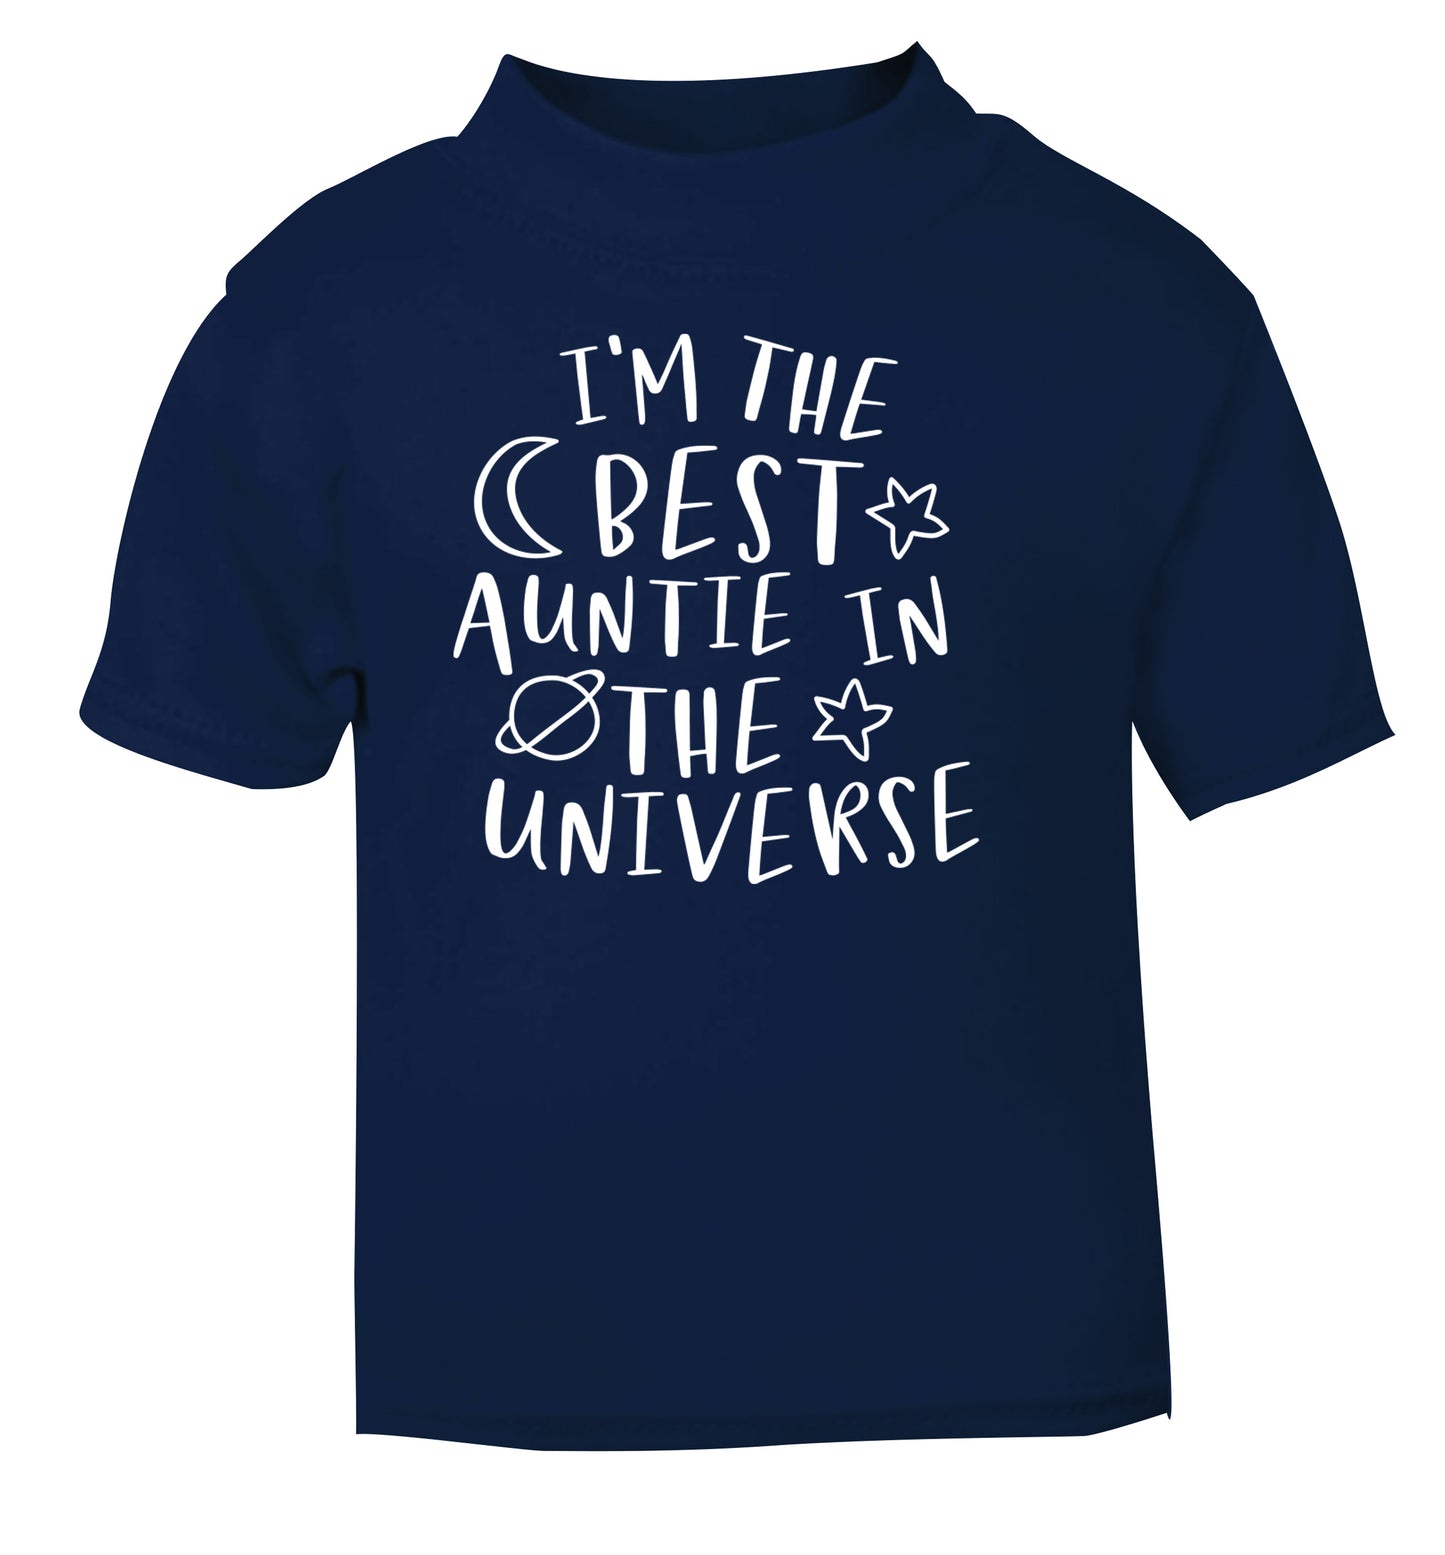 I'm the best auntie in the universe navy Baby Toddler Tshirt 2 Years